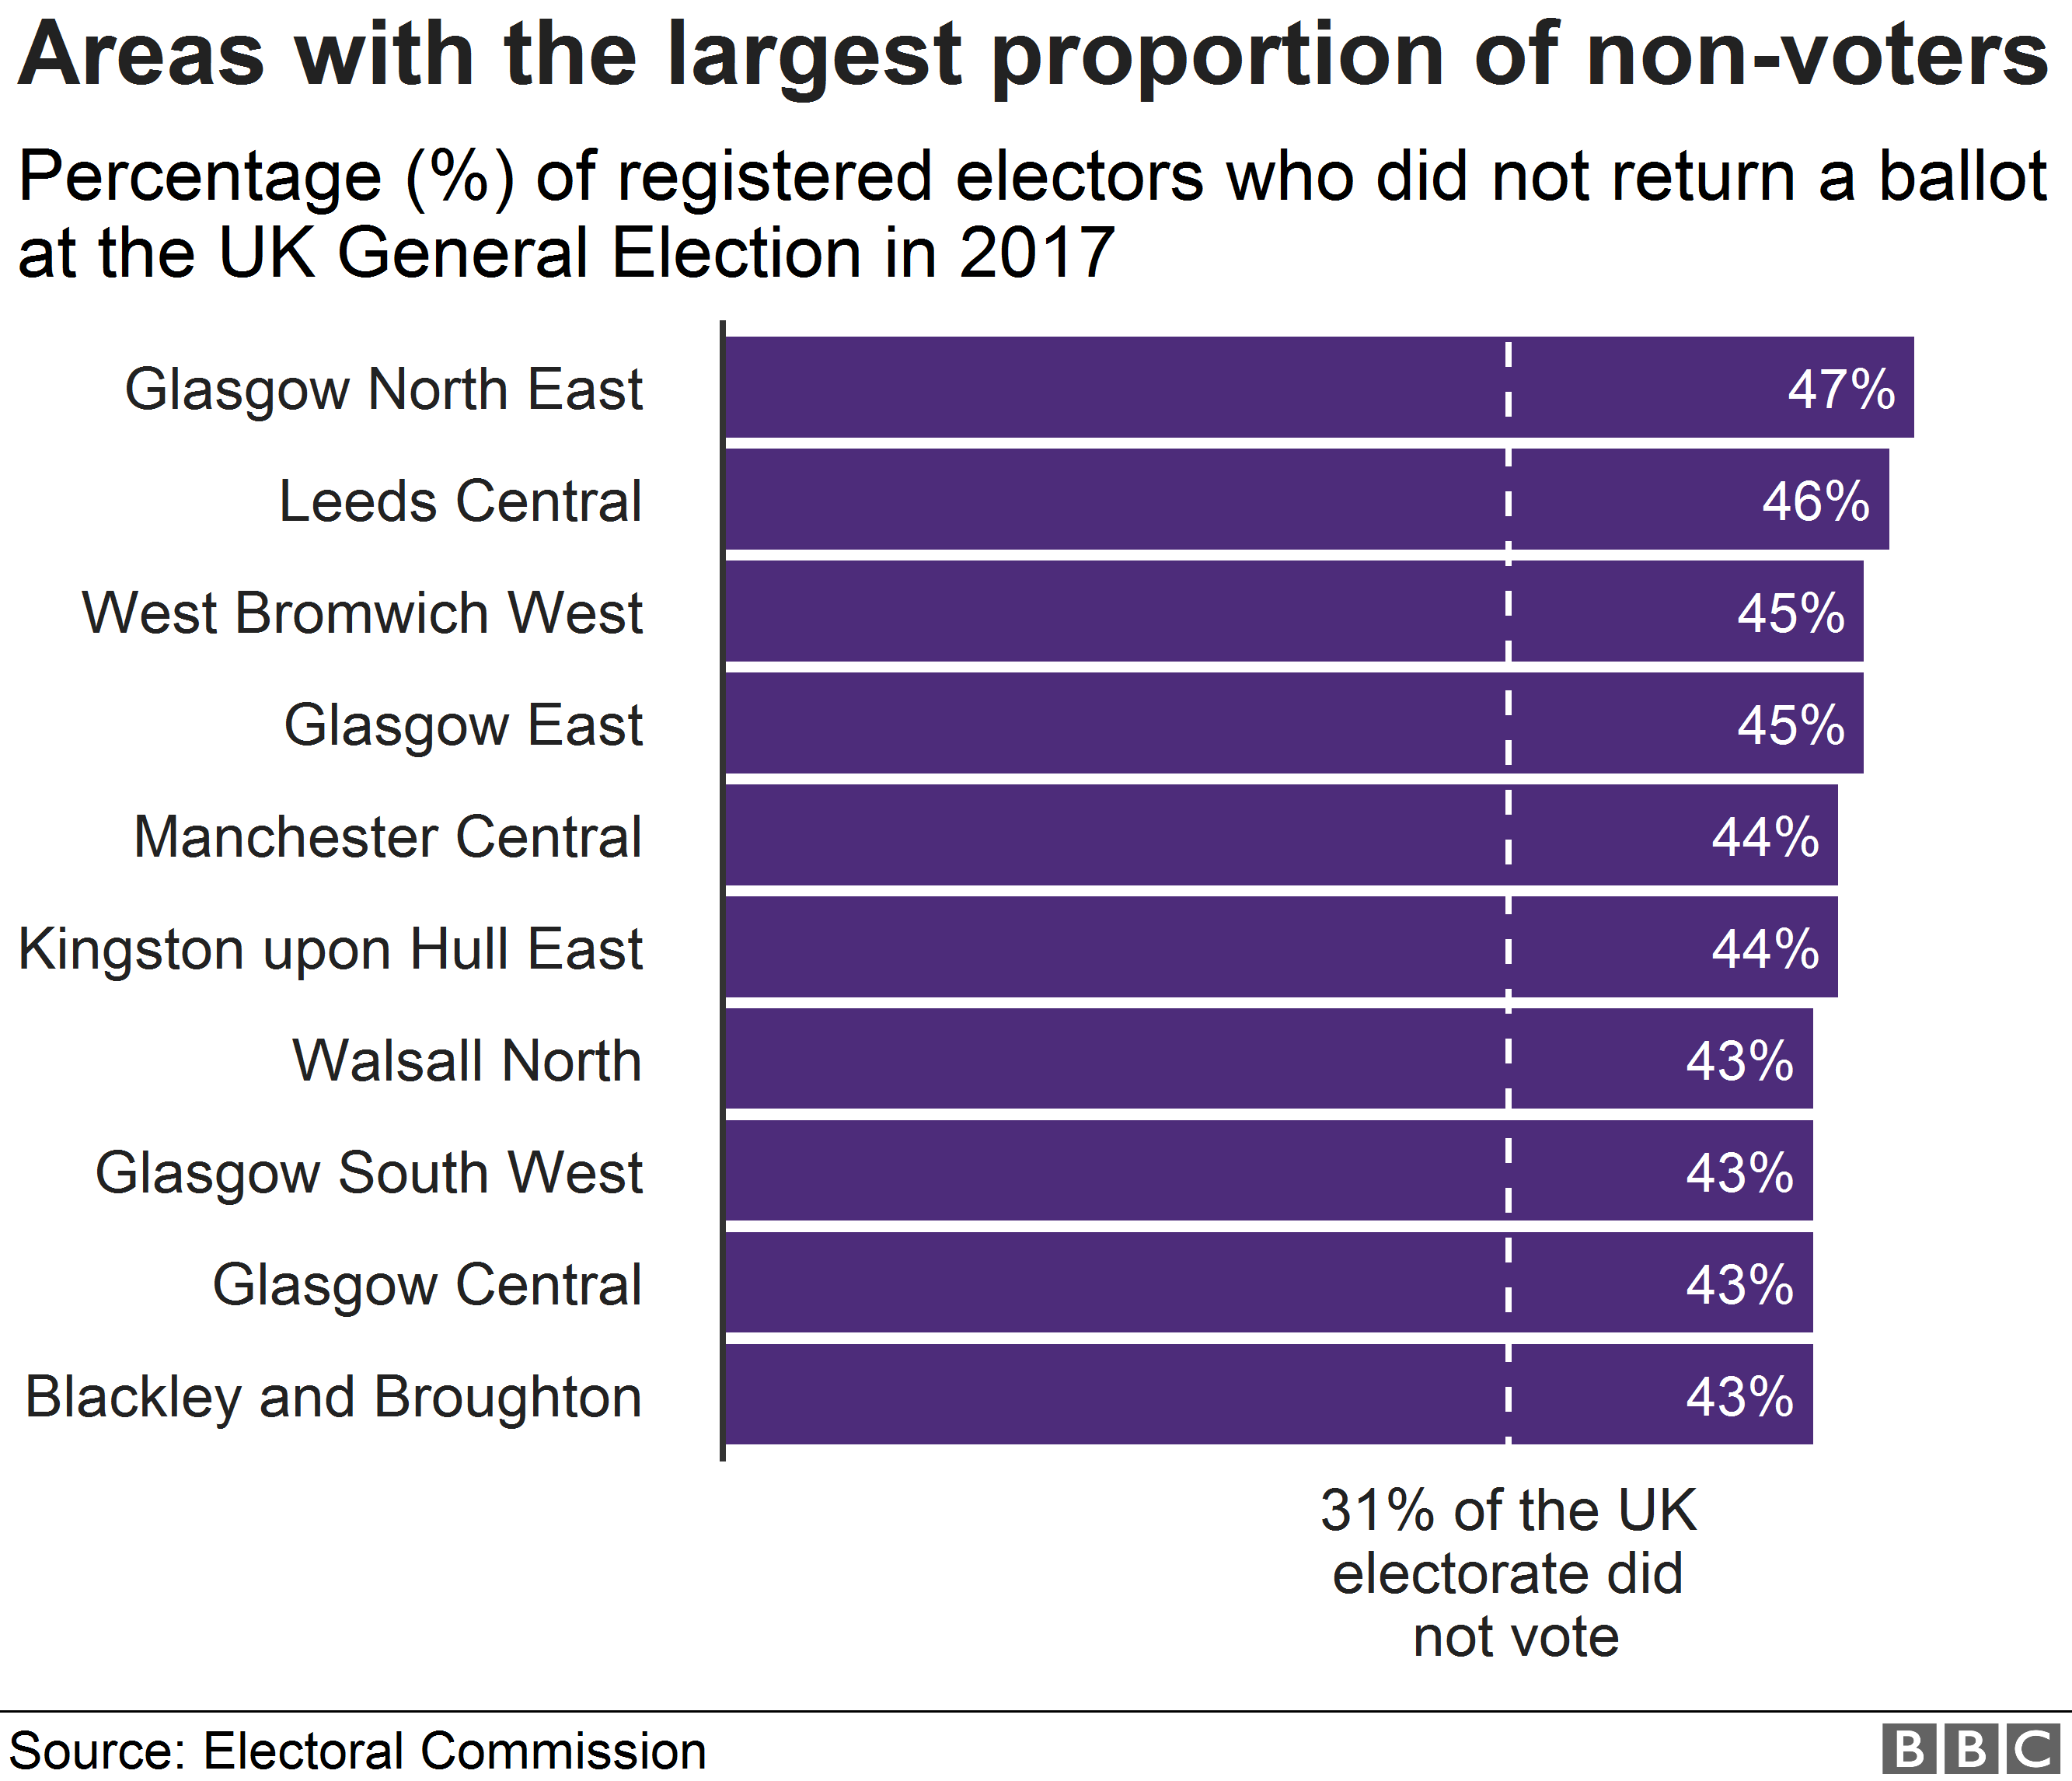 Chart showing areas with the highest proportions of non-voters